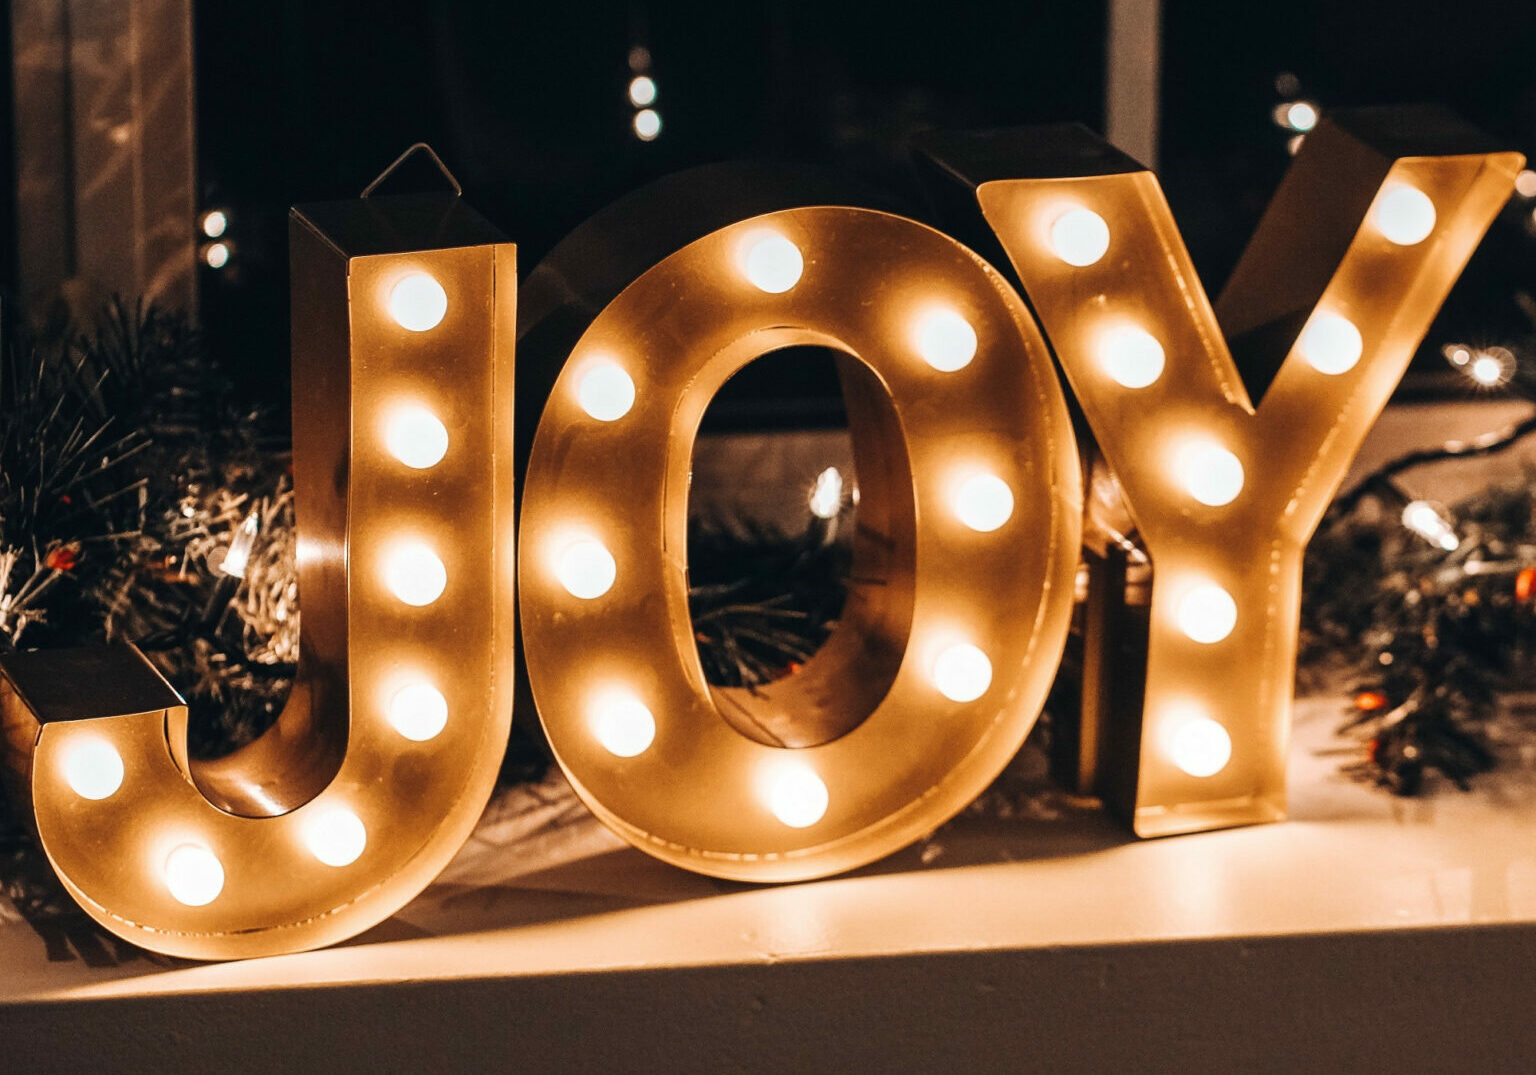 The word joy made up of fairy lights